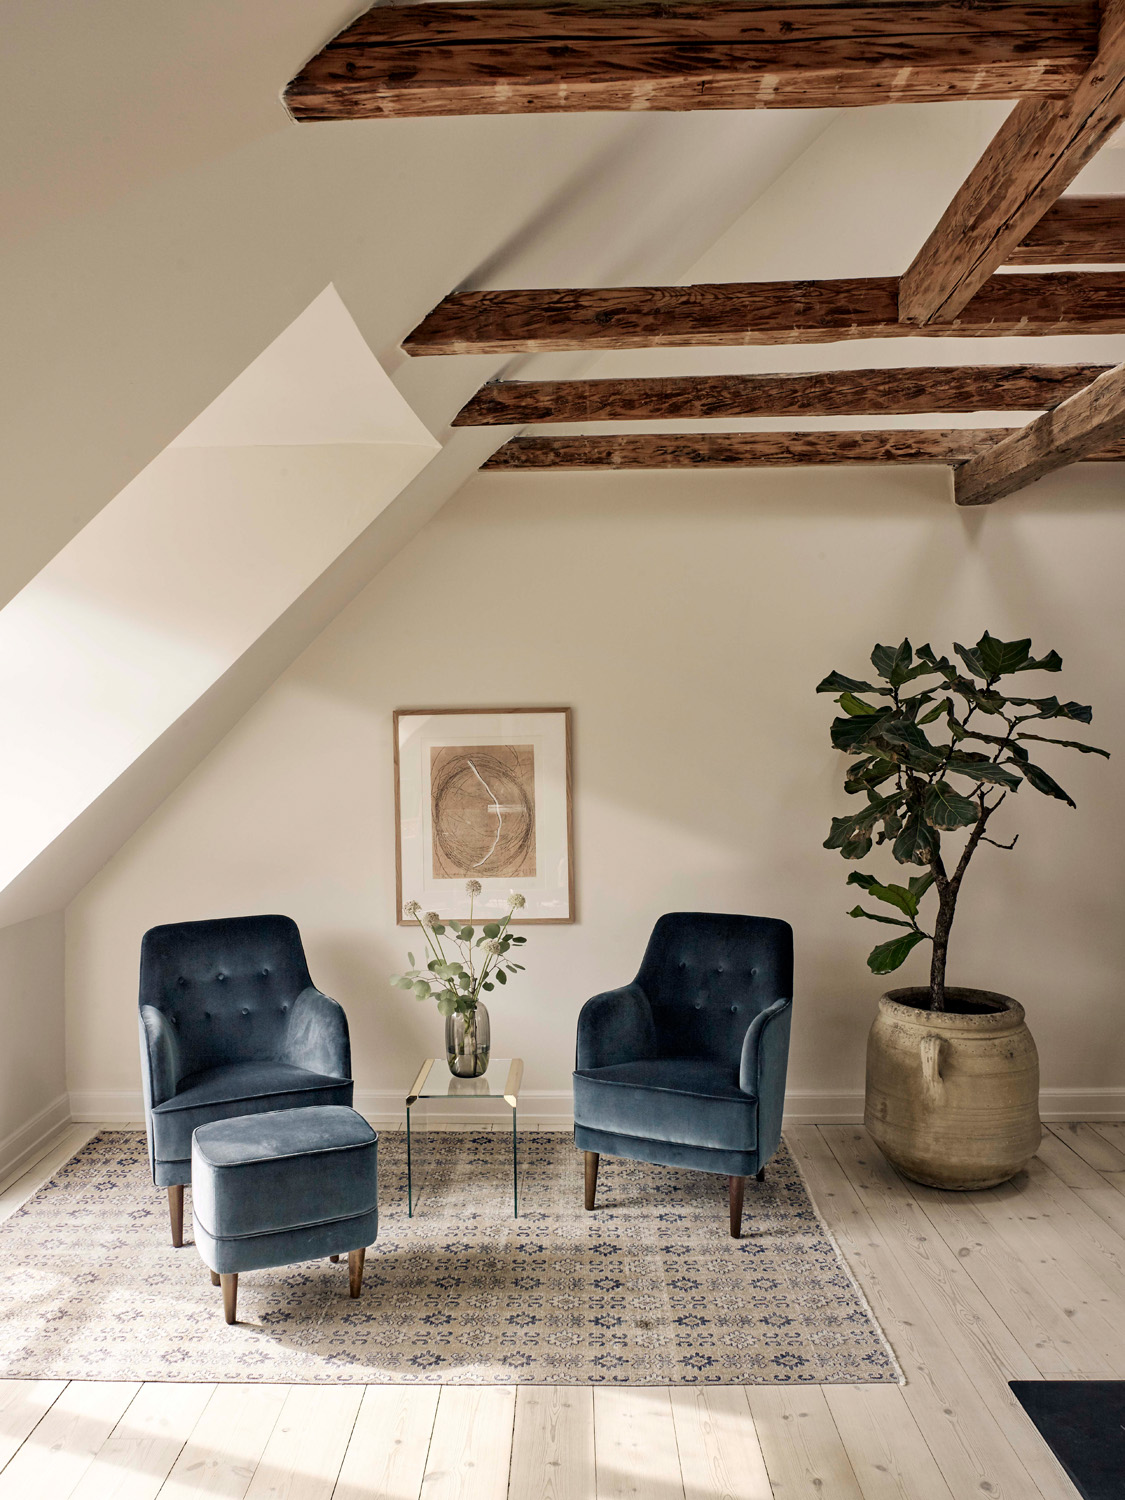 Two armchairs by Penille Lind - luxury interior design and architecture studio in London